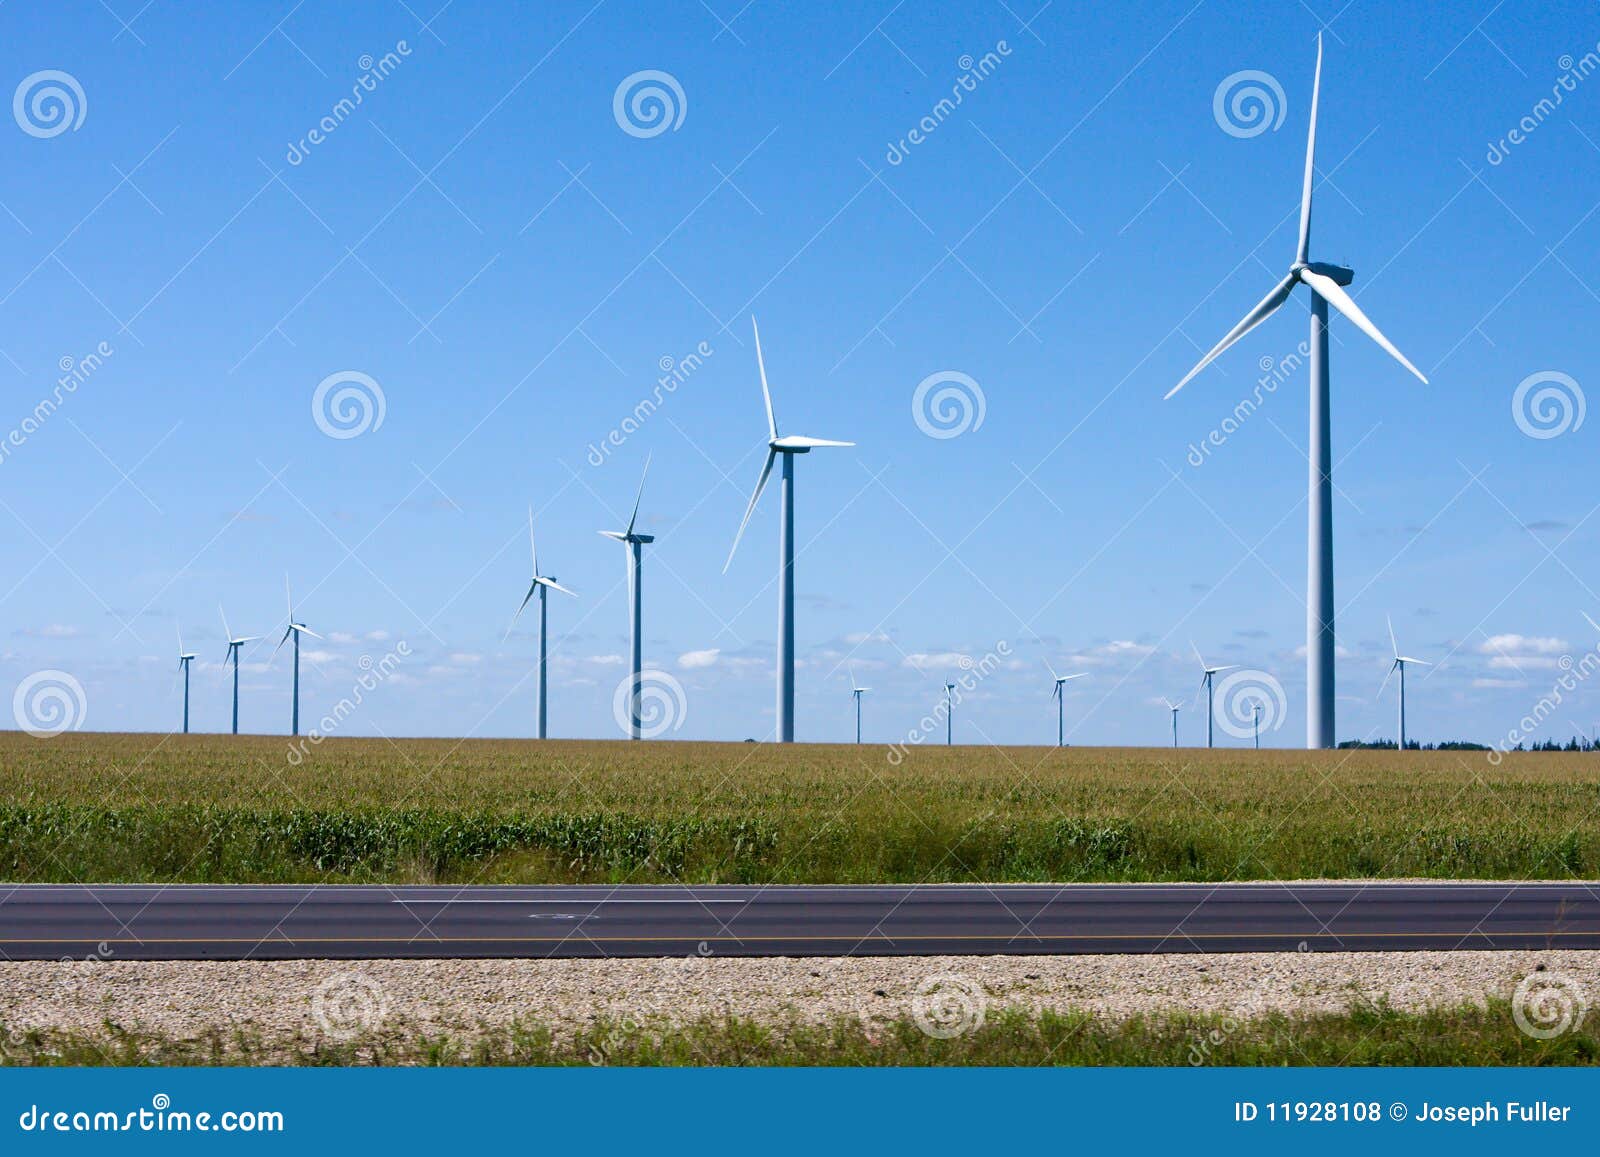 Modern Windmills generating electricity along the Interstate.